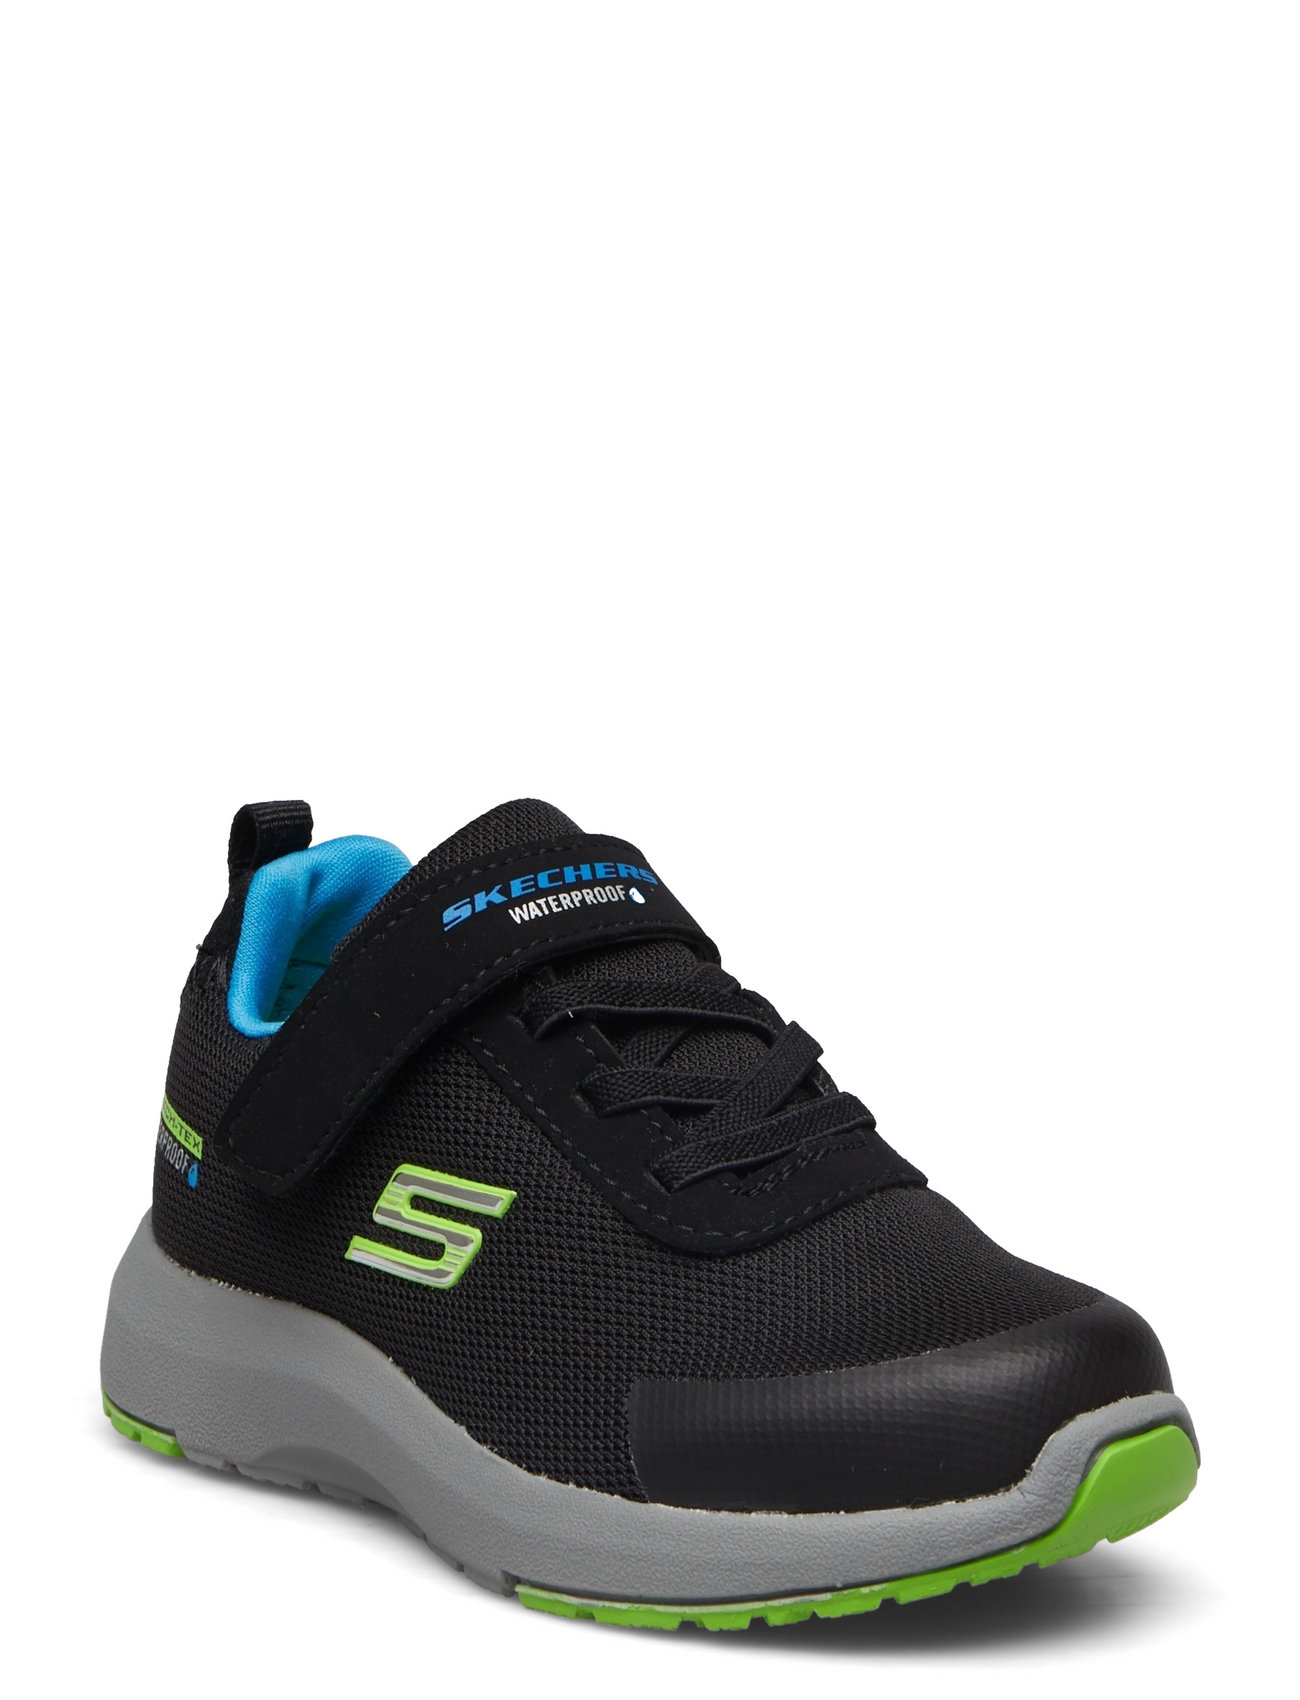 Boys Dynamic Tread - Hydrode - Waterproof Shoes Sports Shoes Running-training Shoes Black Skechers